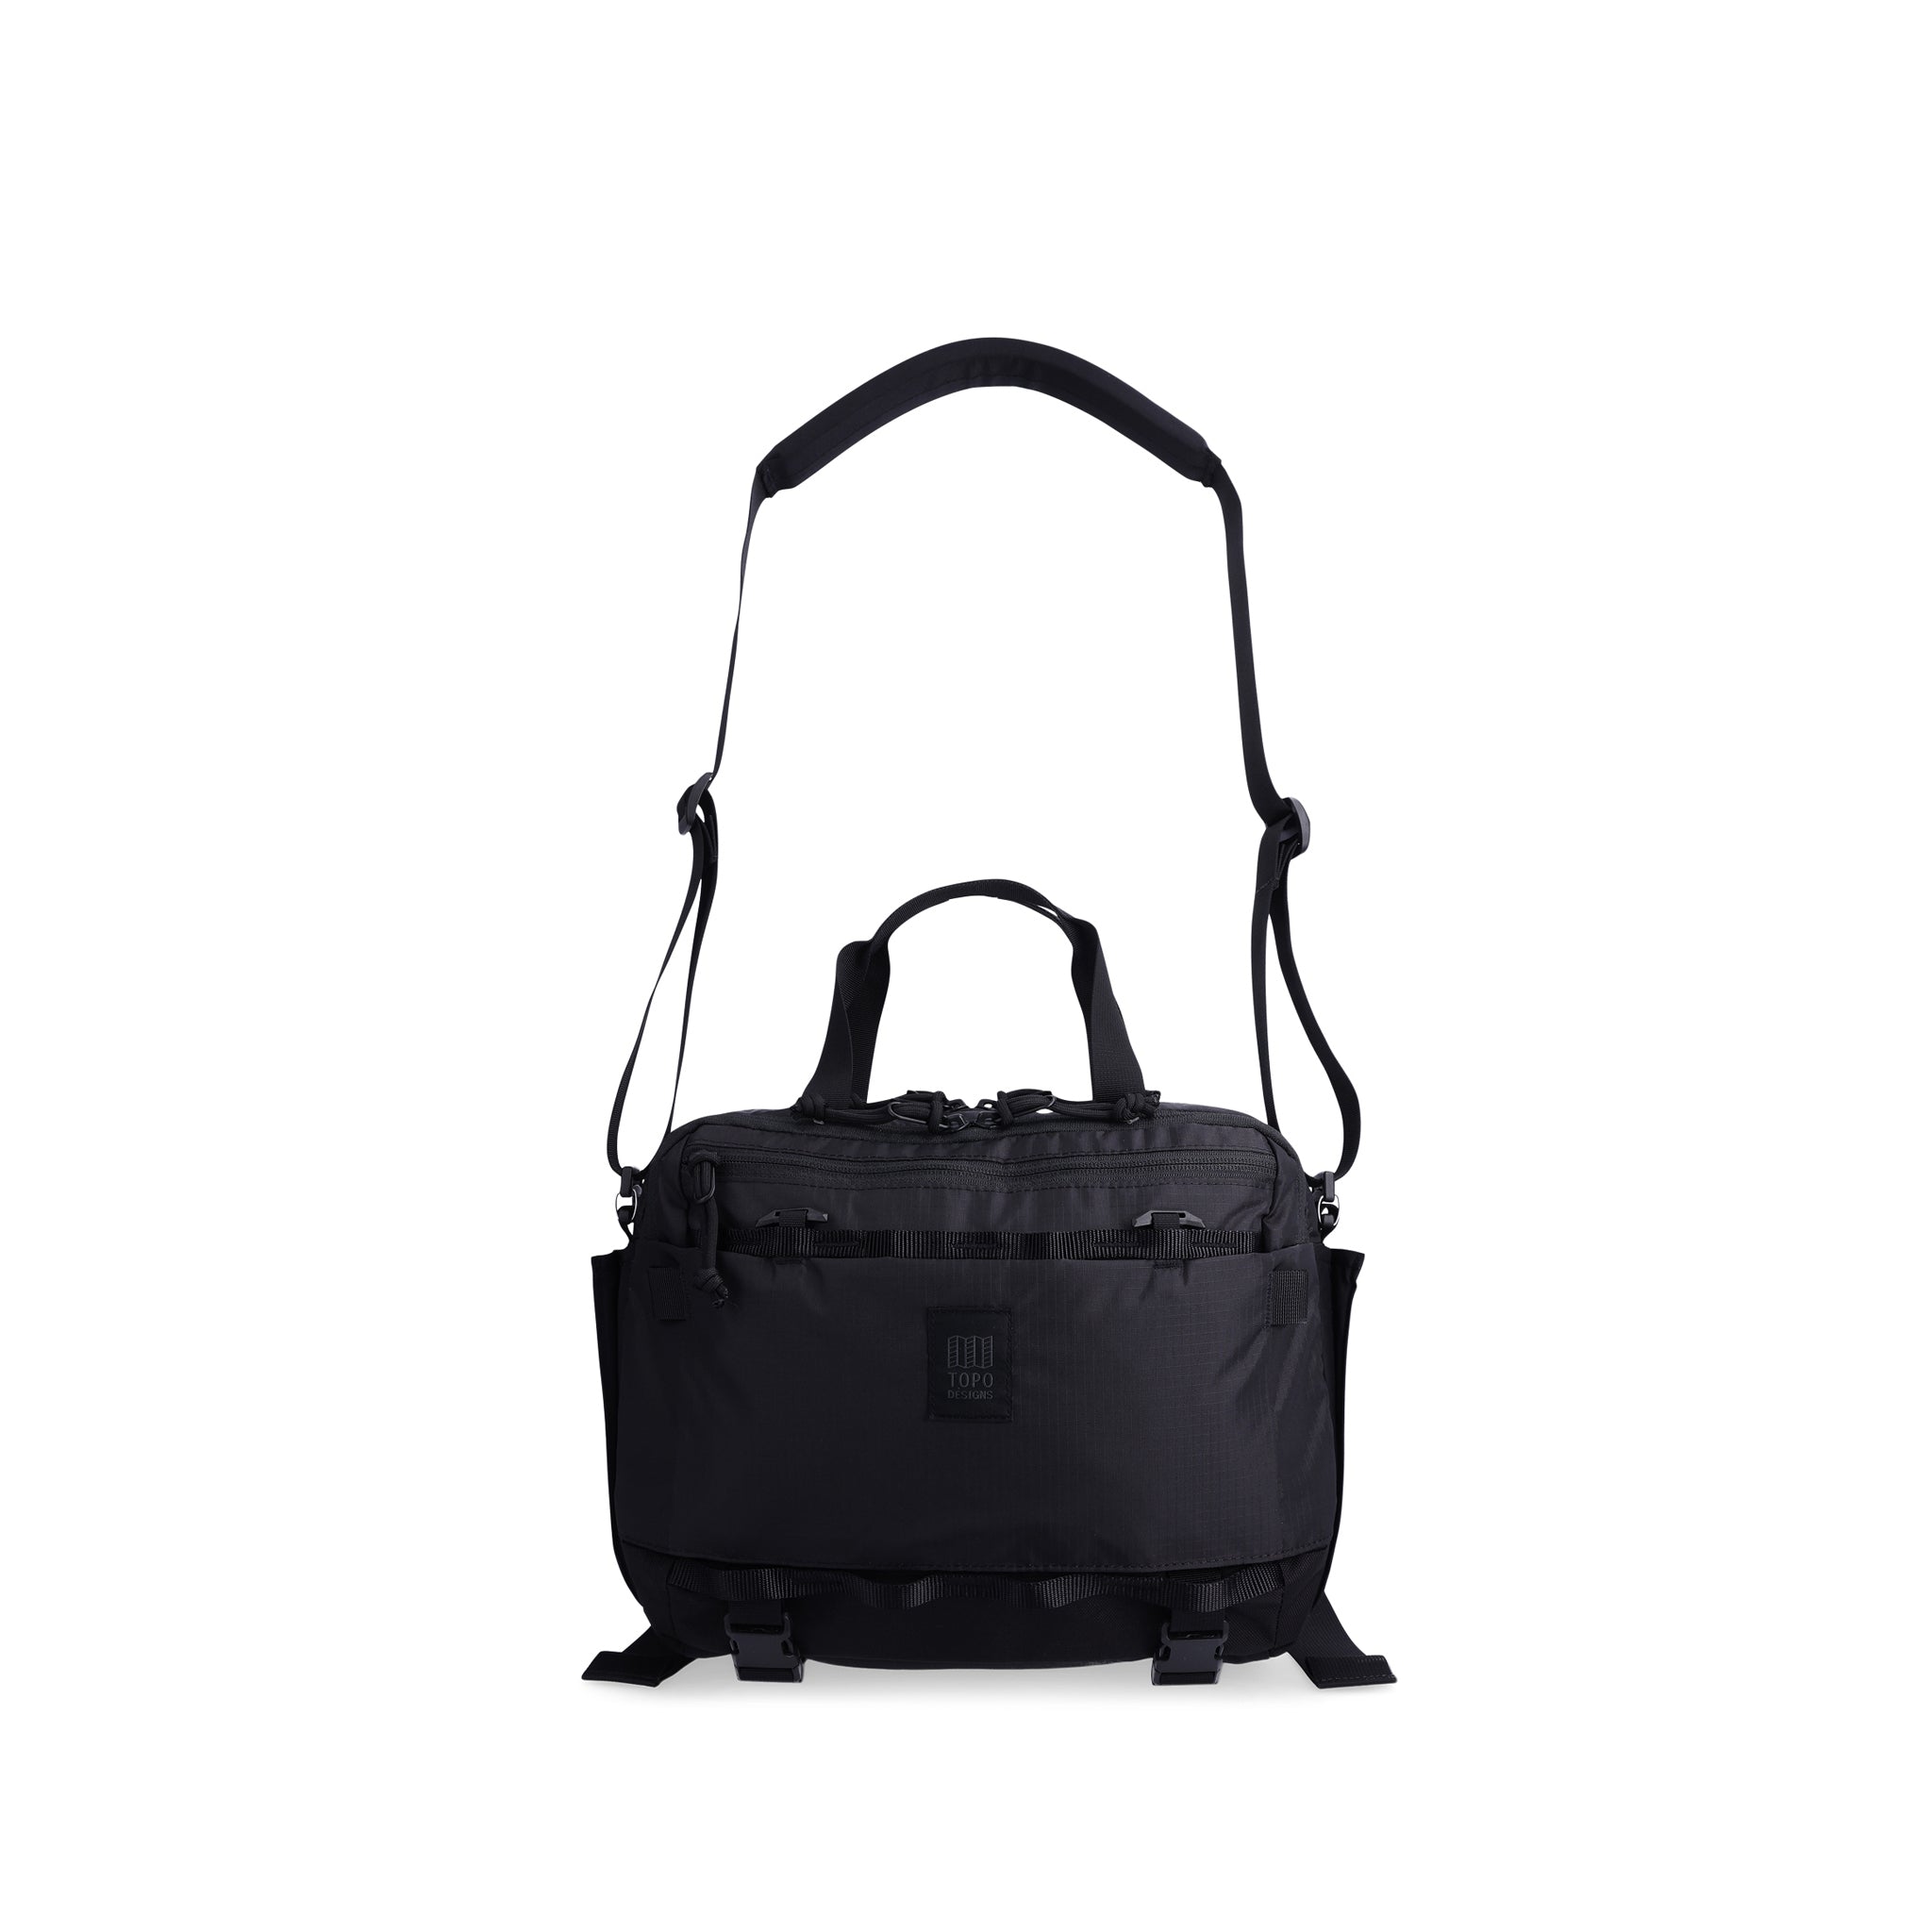 Front view of Topo Designs Mountain Cross Bag in recycled "Black" nylon.